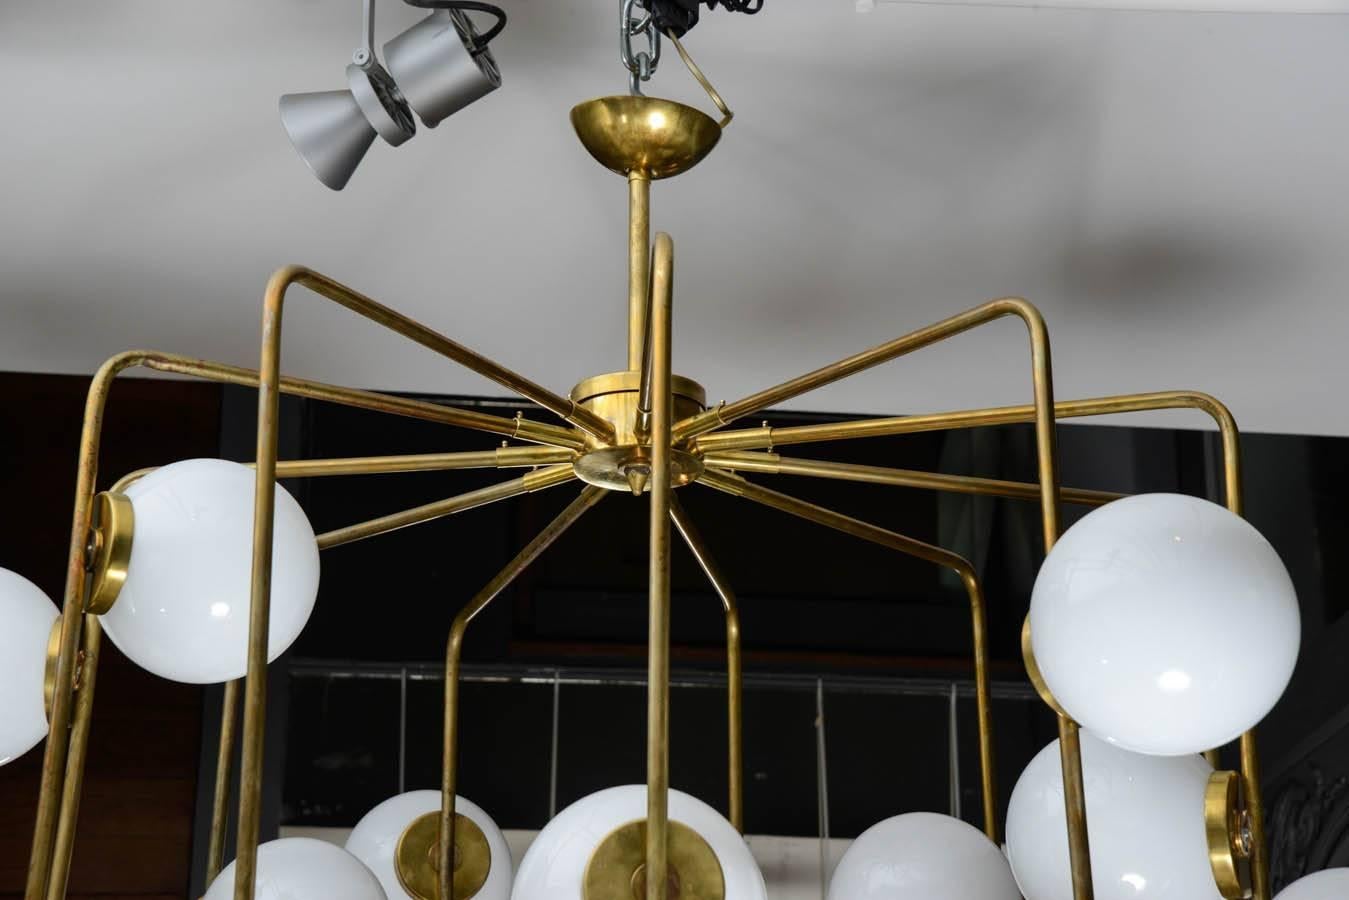 Nice big chandelier made of brass and white glass globes.

The chandelier has an original antic lantern shape, completed by twenty two globes.

Designed by Galerie Glustin Luminaires.